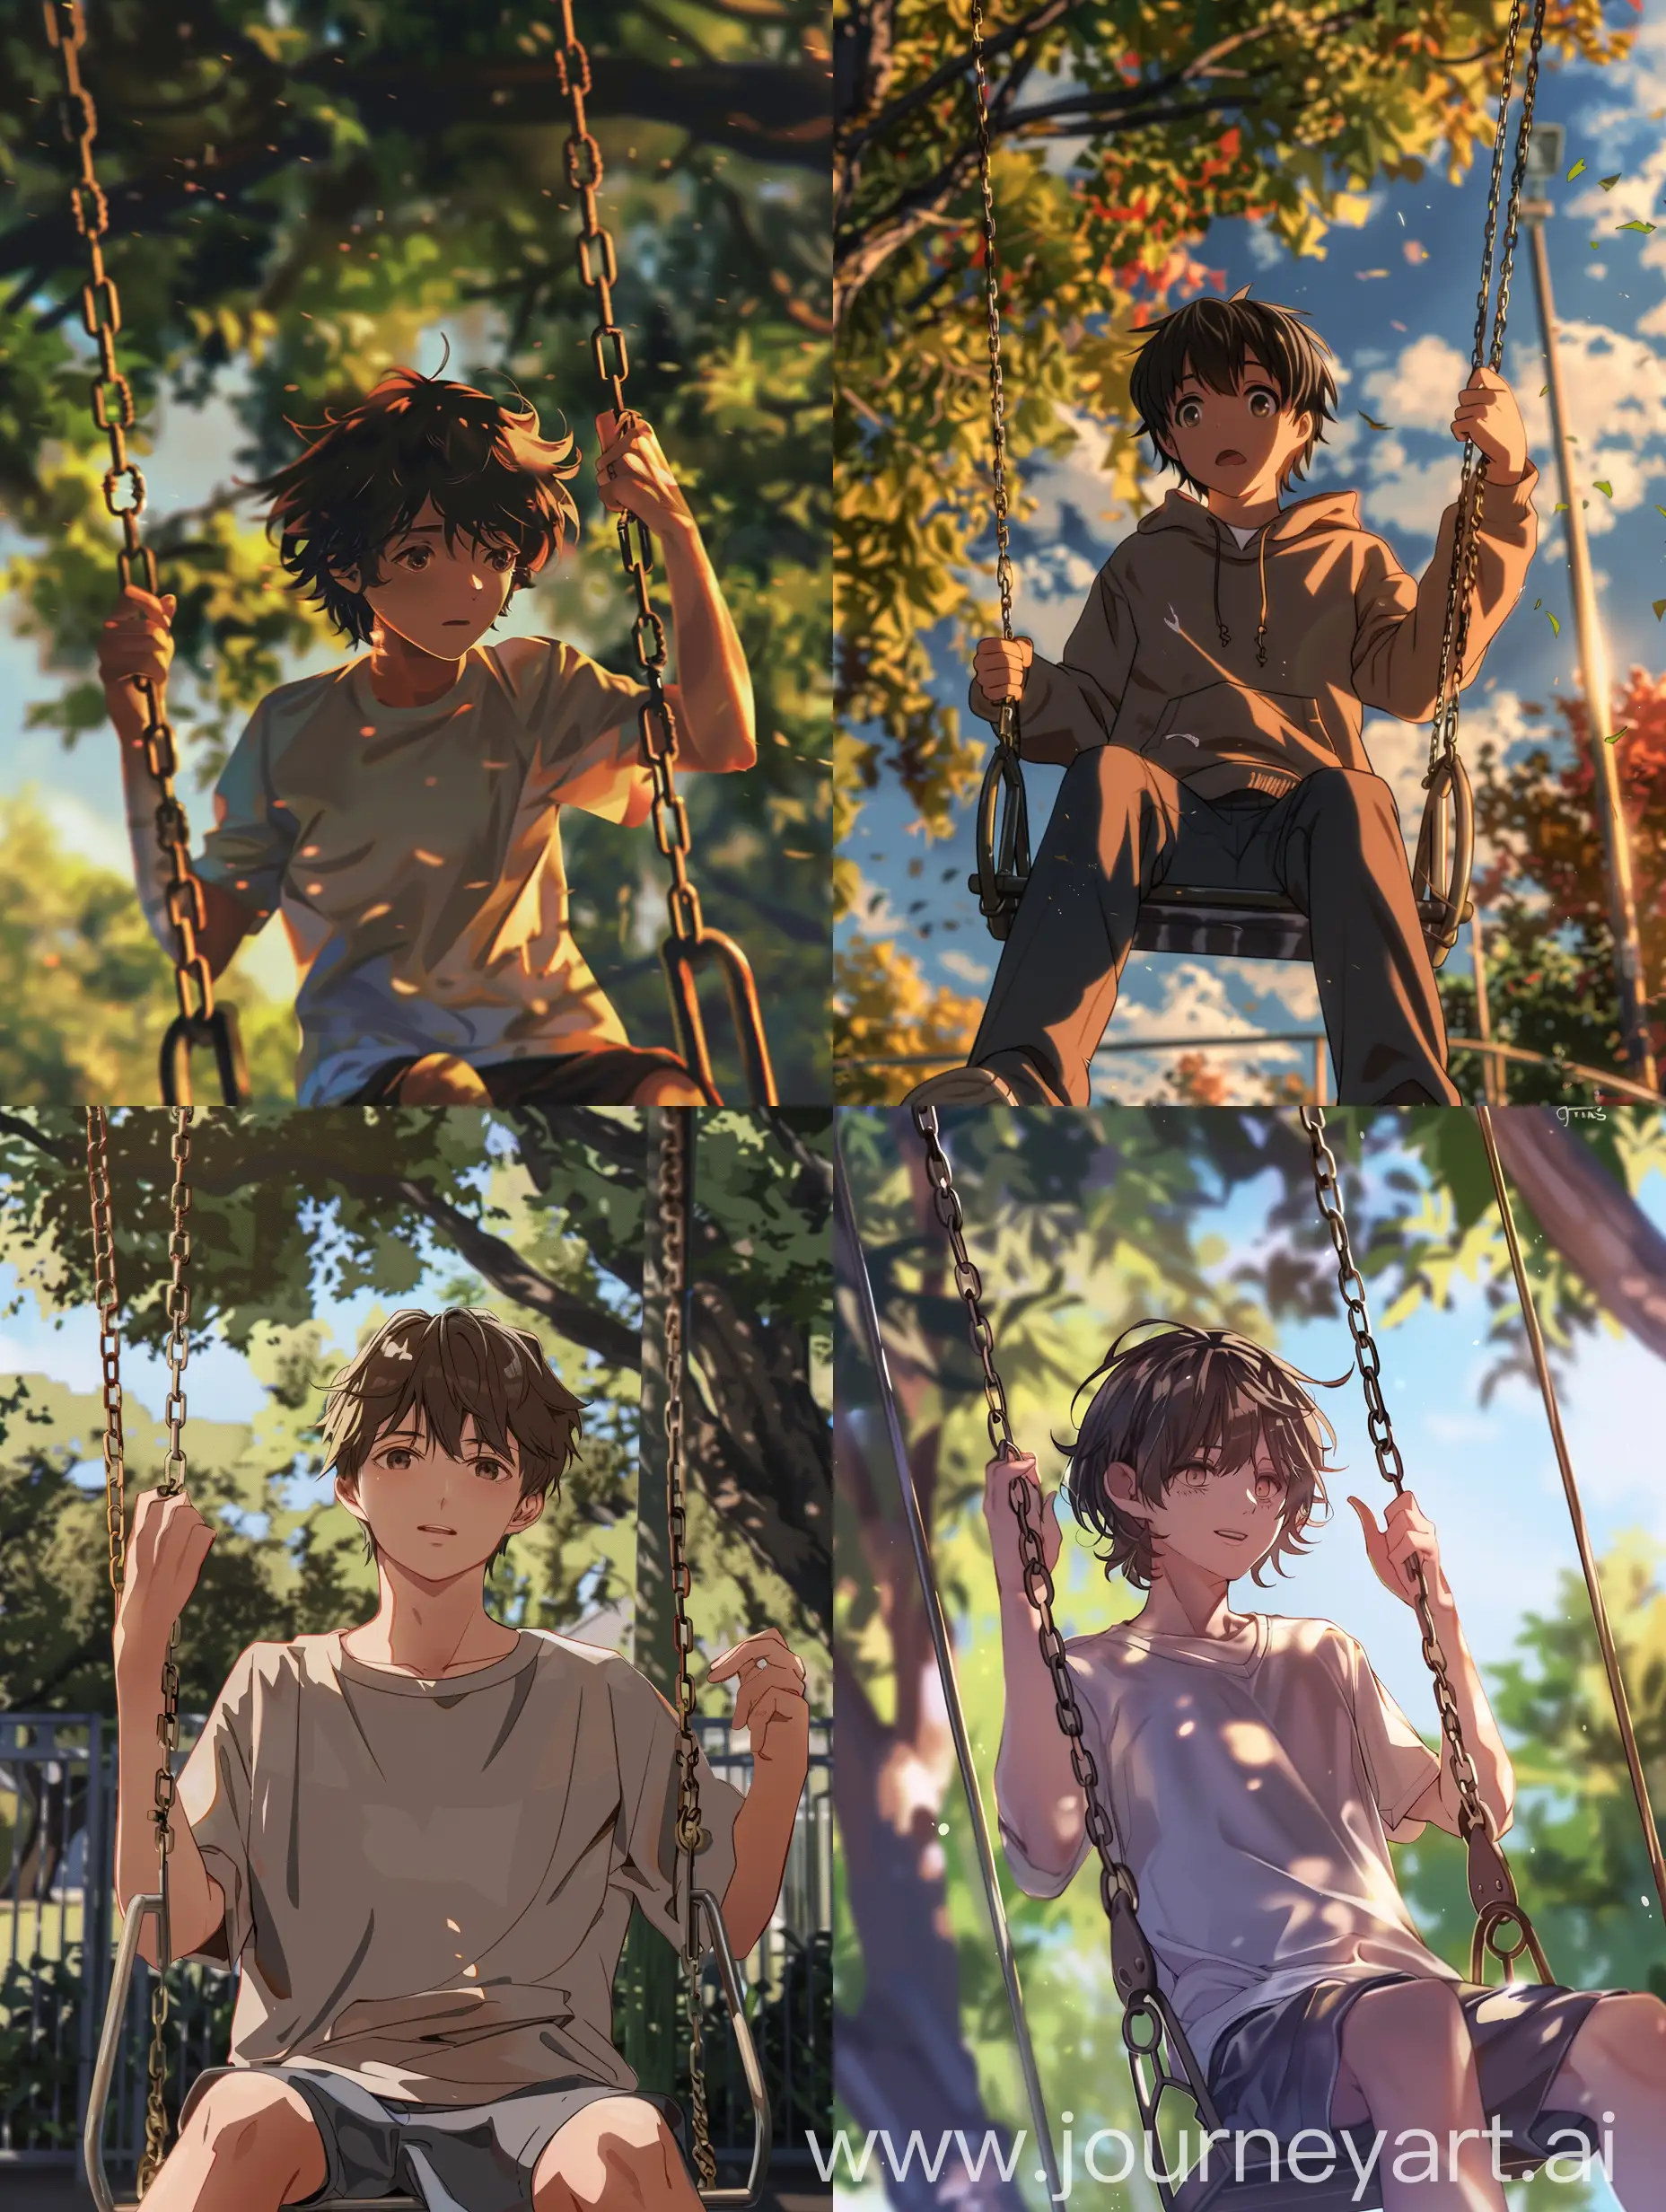 Anime style,a 15 year old boy sitting on swing front view,afternoon time,the boys face should not be bad and distorted,a hand some look,dramatic. (should be perfect for lip sync) park.